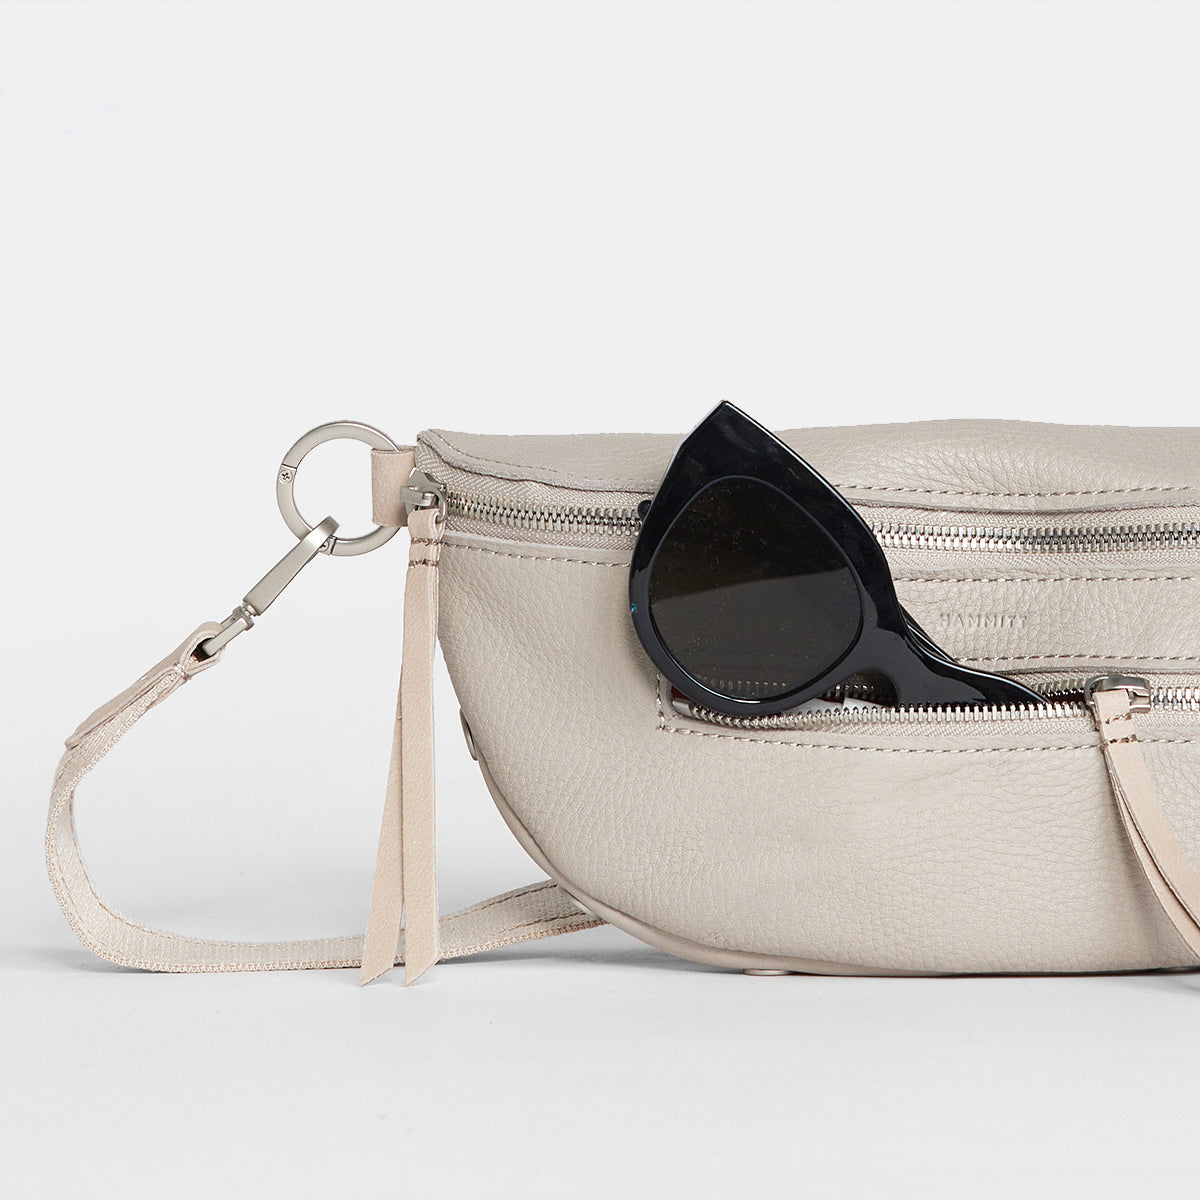 Charles-Crossbody-Paved-Grey-Front-View-Detail